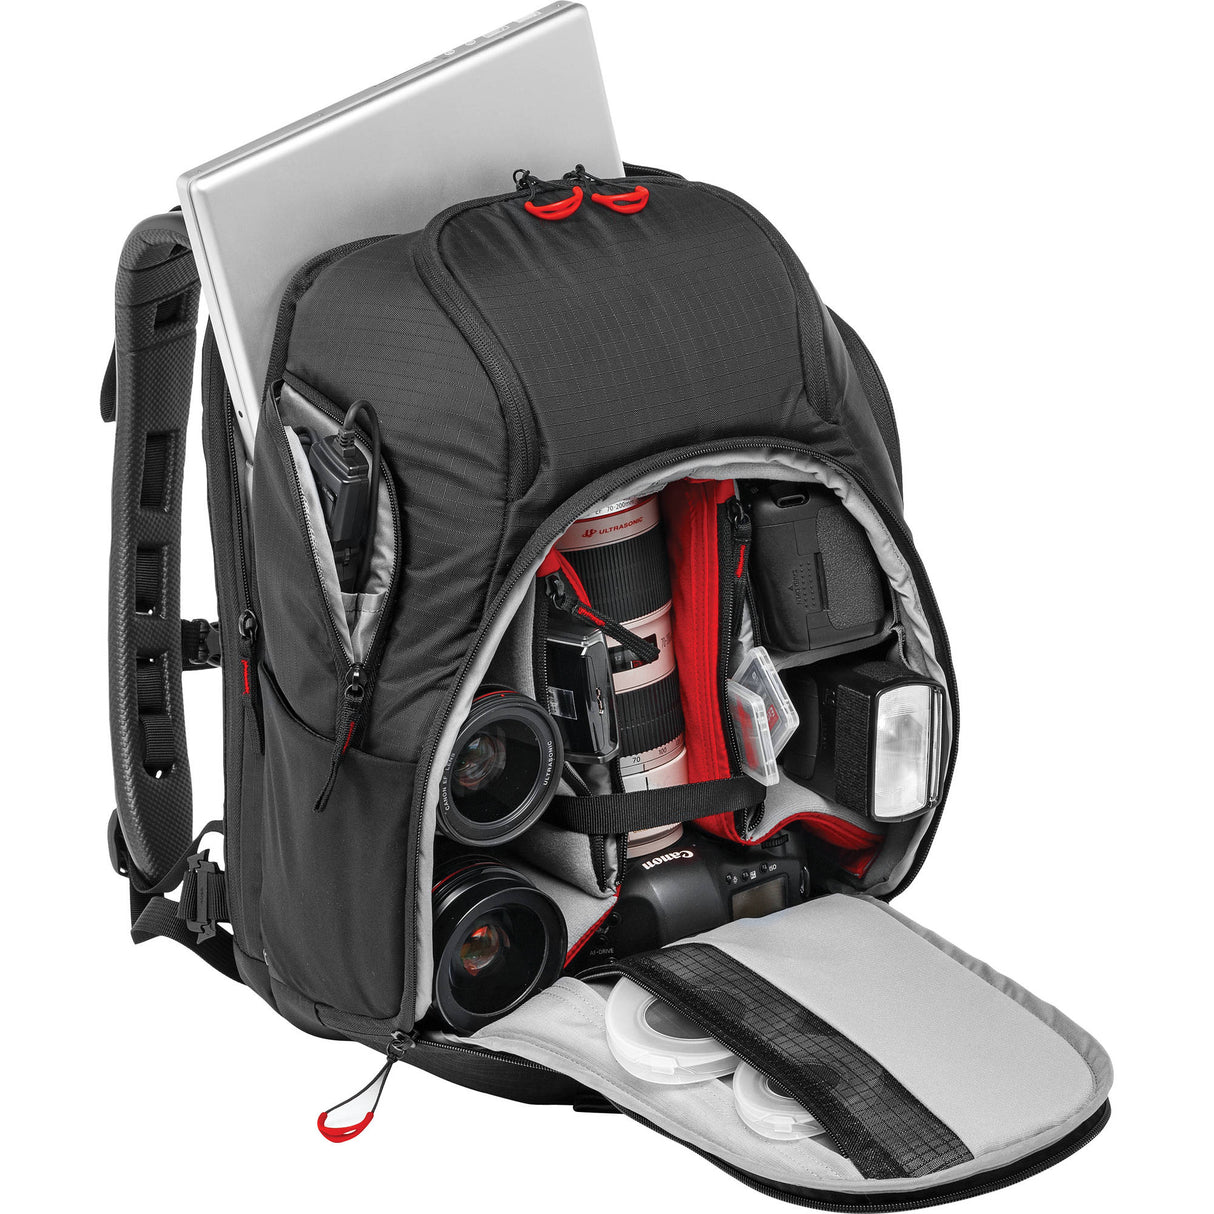 Manfrotto Multipro-120 Pro-Light Camera Backpack